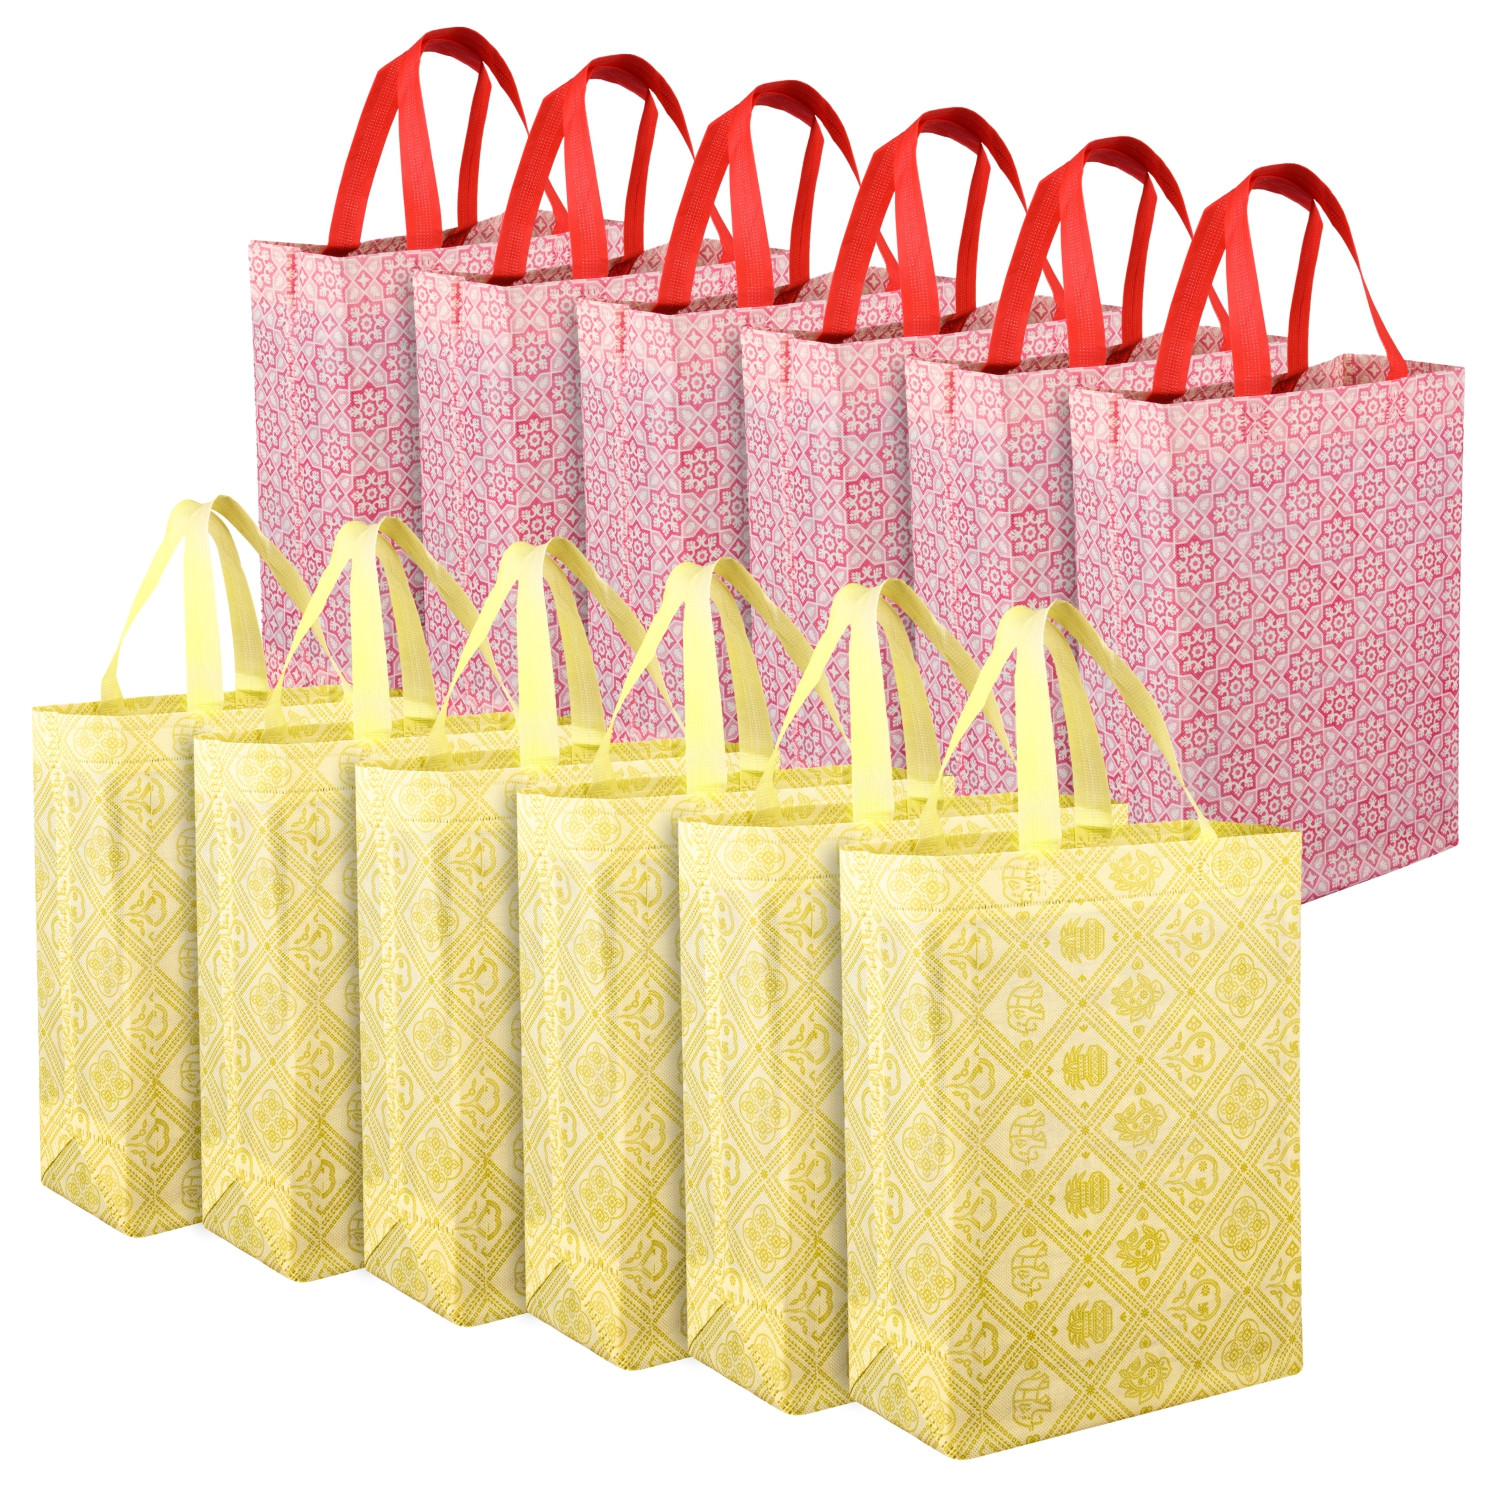 Wrapables Large Foldable Tote Nylon Reusable Grocery Bags, 5 Pack, Carefree  Paradise, 5 Pieces - Harris Teeter